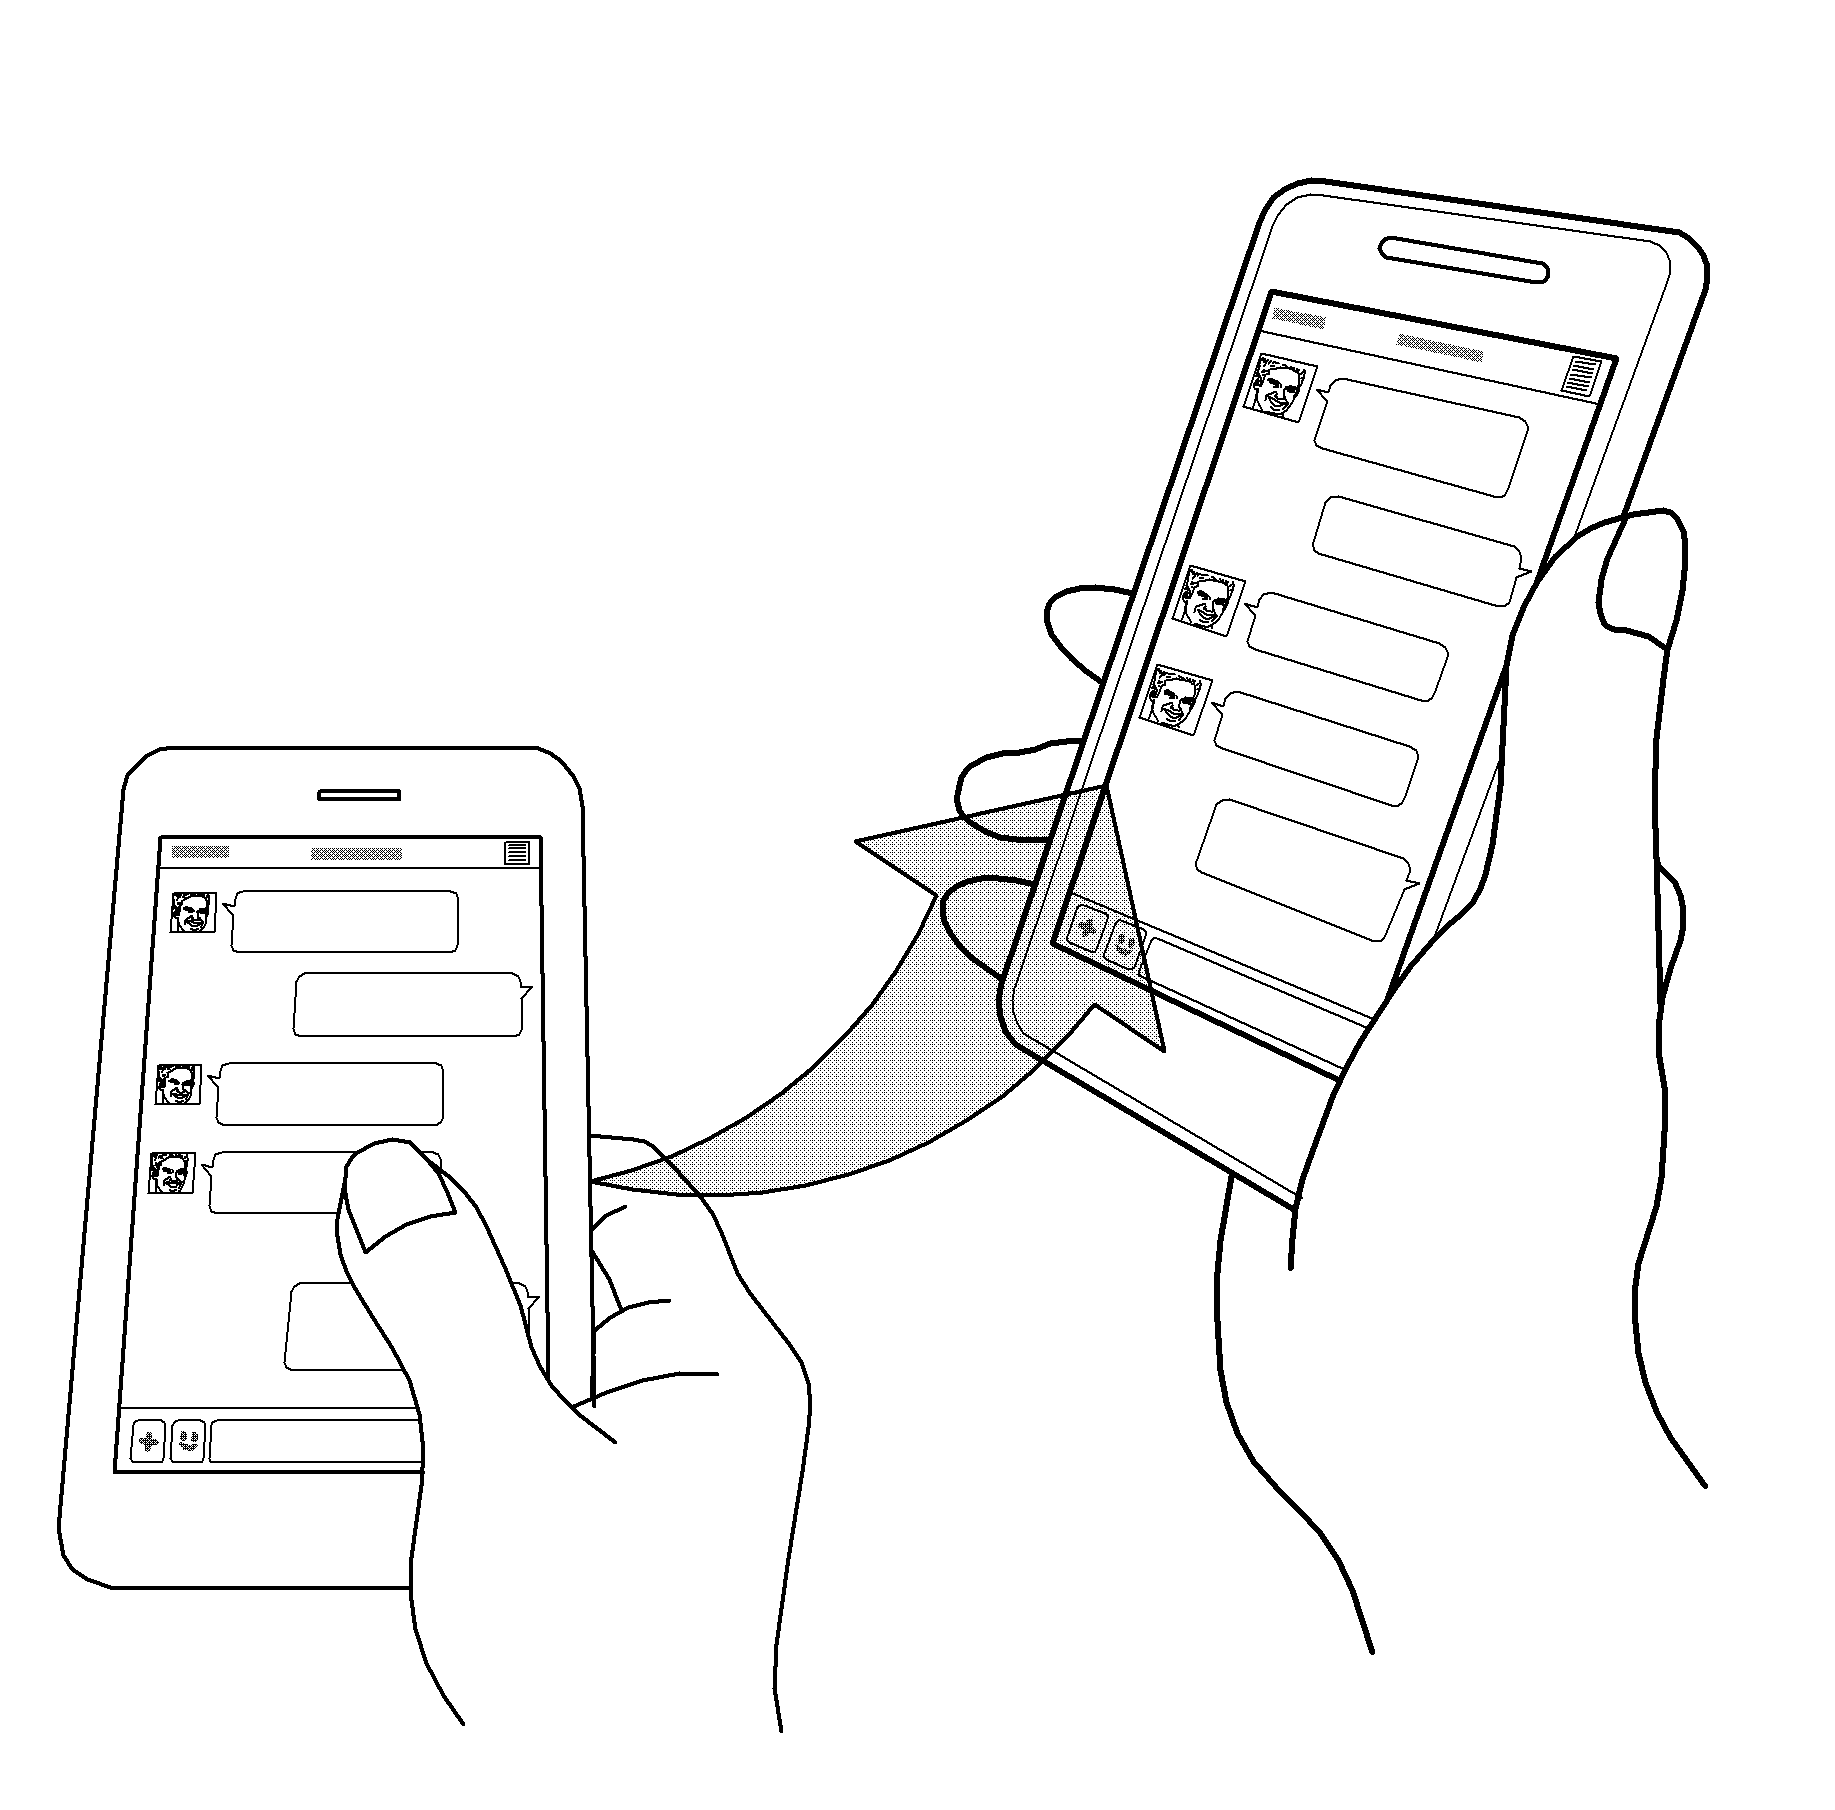 Method and apparatus for initiating a call in an electronic device